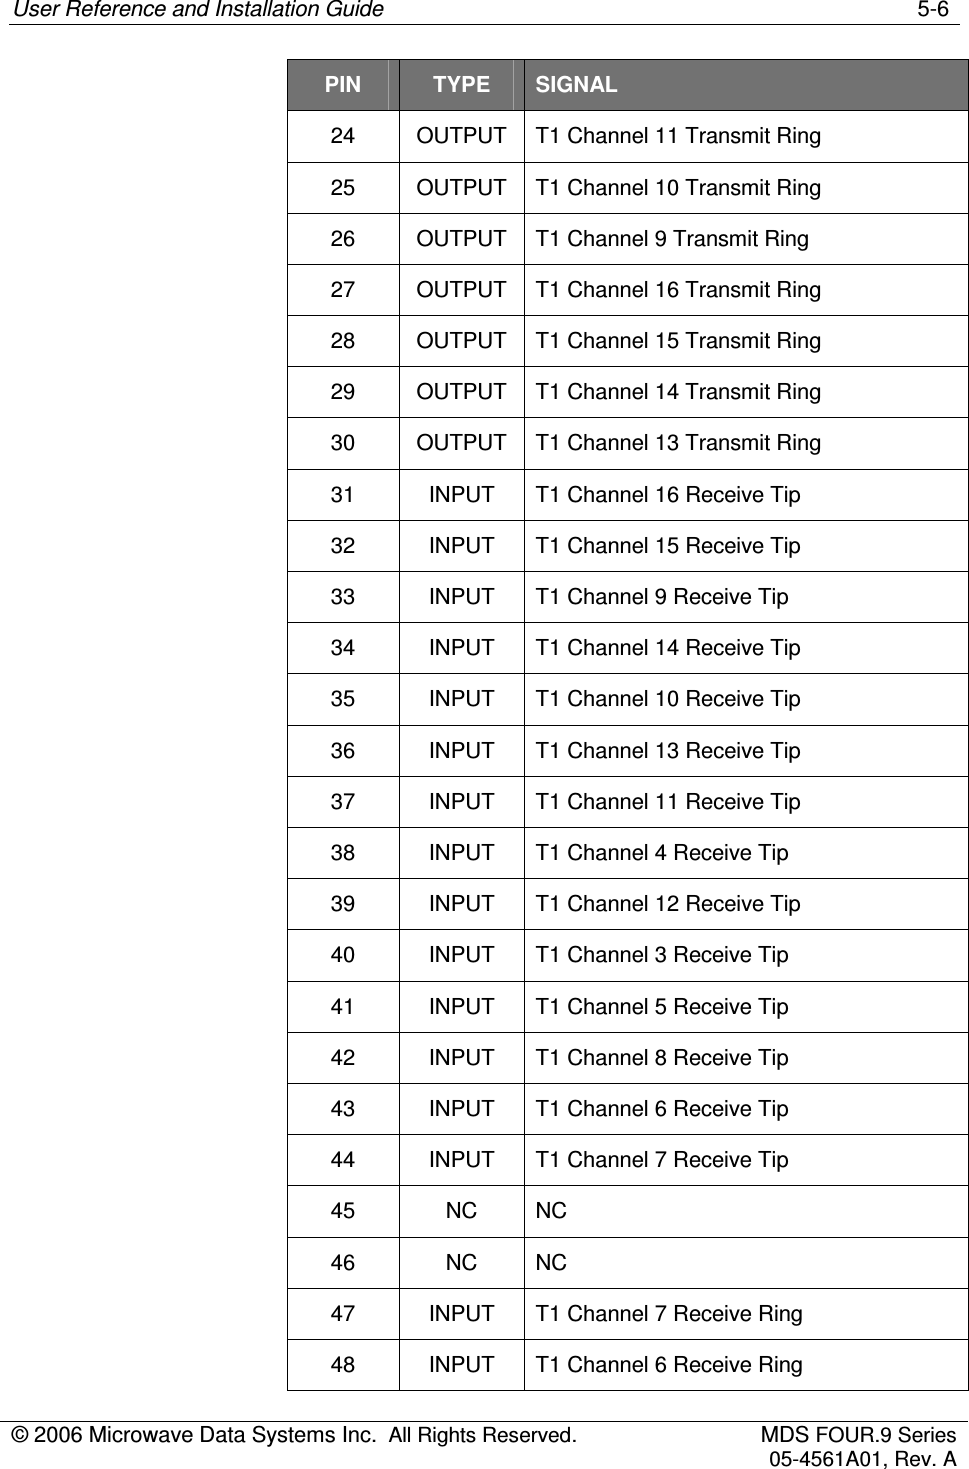 User Reference and Installation Guide    5-6 © 2006 Microwave Data Systems Inc.  All Rights Reserved.  MDS FOUR.9 Series 05-4561A01, Rev. A    PIN  TYPE  SIGNAL   24  OUTPUT  T1 Channel 11 Transmit Ring   25  OUTPUT  T1 Channel 10 Transmit Ring   26  OUTPUT  T1 Channel 9 Transmit Ring   27  OUTPUT  T1 Channel 16 Transmit Ring   28  OUTPUT  T1 Channel 15 Transmit Ring   29  OUTPUT  T1 Channel 14 Transmit Ring   30  OUTPUT  T1 Channel 13 Transmit Ring   31  INPUT  T1 Channel 16 Receive Tip   32  INPUT  T1 Channel 15 Receive Tip   33  INPUT  T1 Channel 9 Receive Tip   34  INPUT  T1 Channel 14 Receive Tip   35  INPUT  T1 Channel 10 Receive Tip   36  INPUT  T1 Channel 13 Receive Tip   37  INPUT  T1 Channel 11 Receive Tip   38  INPUT  T1 Channel 4 Receive Tip   39  INPUT  T1 Channel 12 Receive Tip   40  INPUT  T1 Channel 3 Receive Tip   41  INPUT  T1 Channel 5 Receive Tip   42  INPUT  T1 Channel 8 Receive Tip   43  INPUT  T1 Channel 6 Receive Tip   44  INPUT  T1 Channel 7 Receive Tip   45  NC  NC   46  NC  NC   47  INPUT  T1 Channel 7 Receive Ring   48  INPUT  T1 Channel 6 Receive Ring 